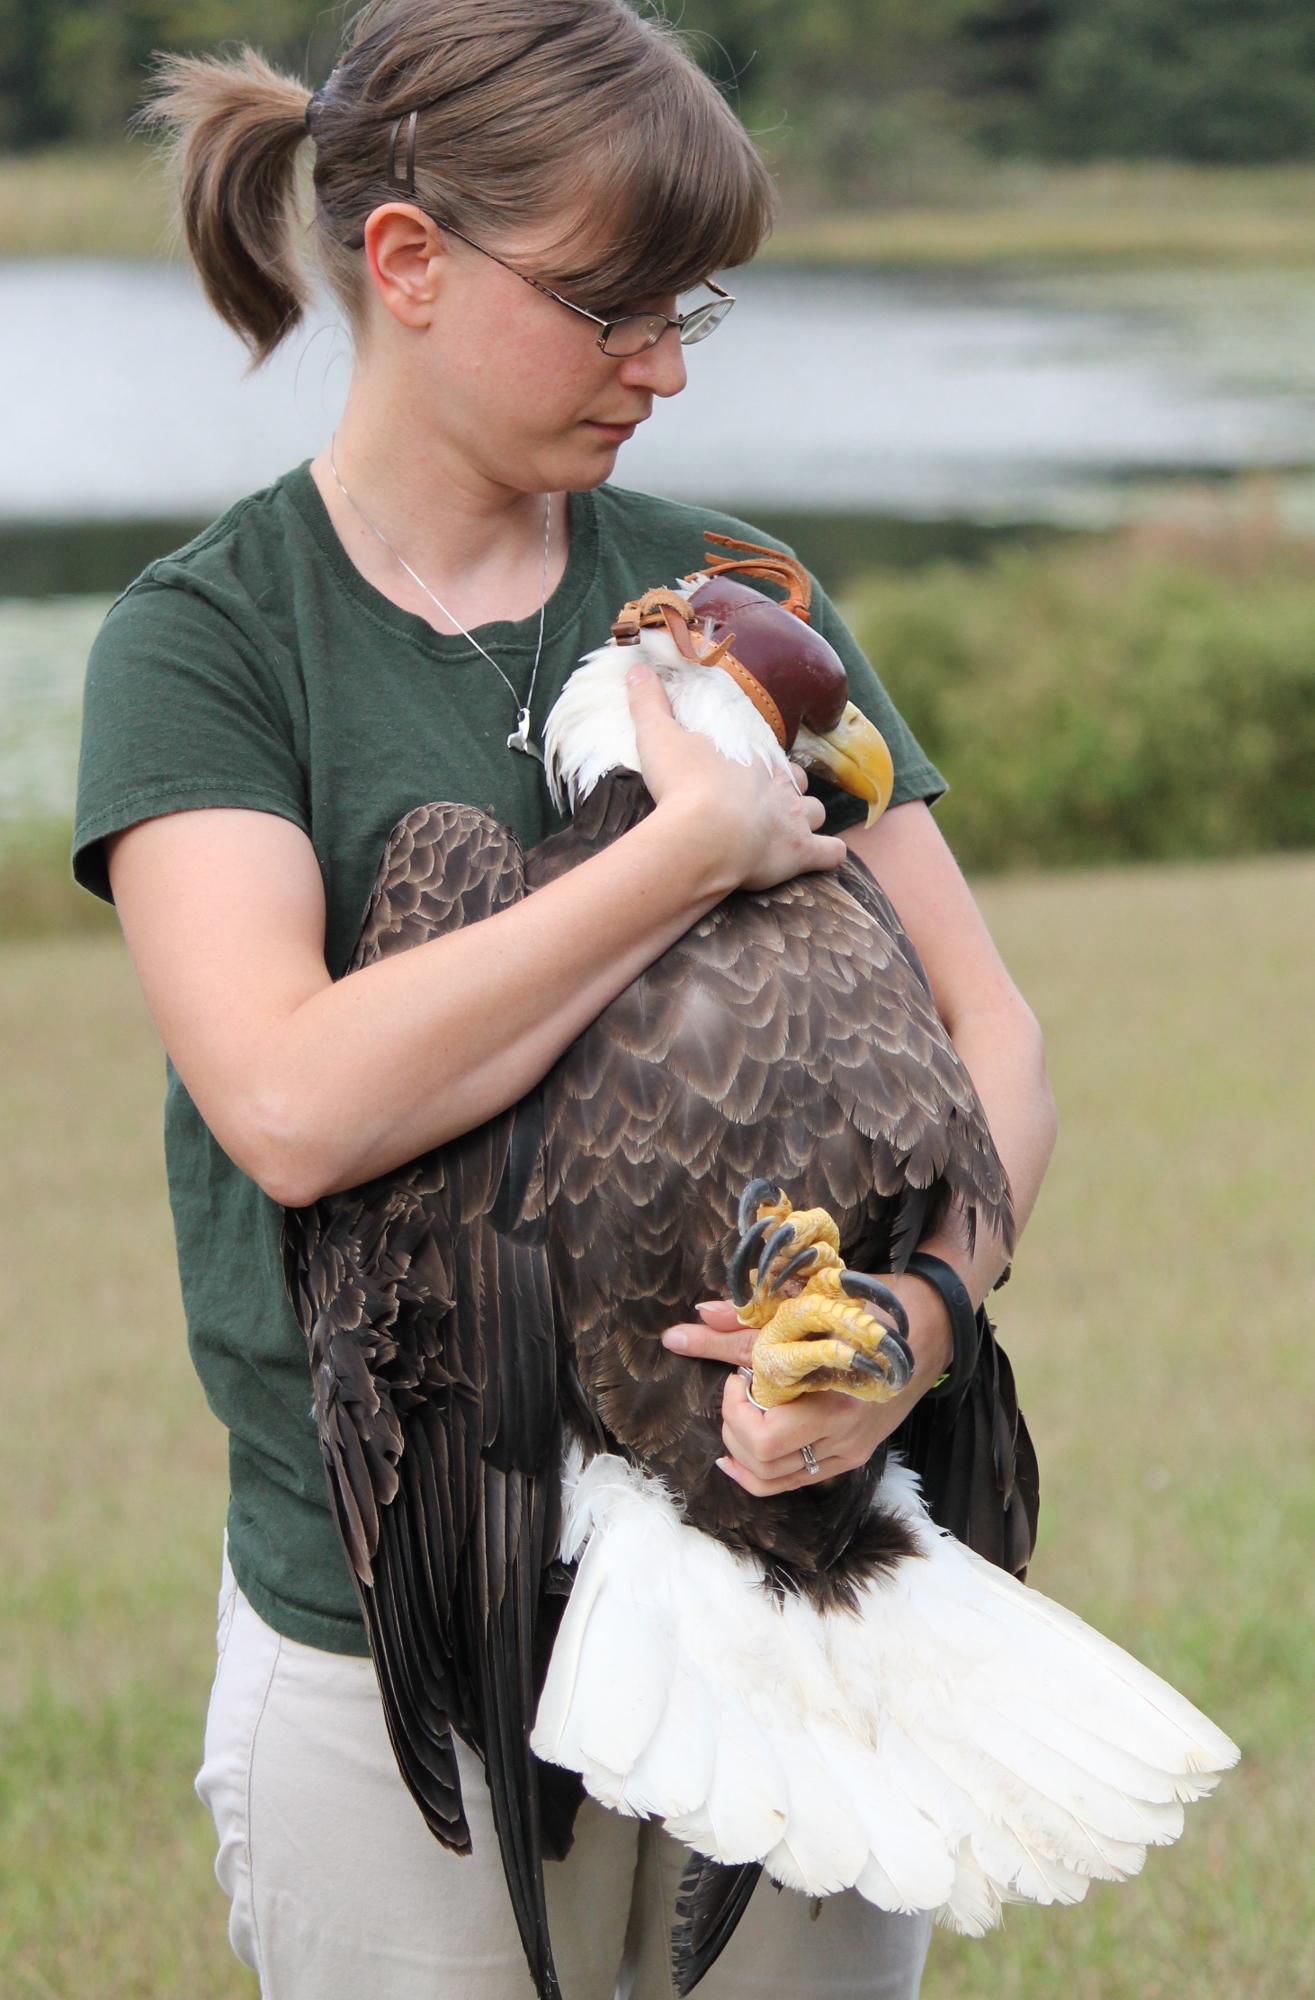 Veterinary technician Sam Little carried the bird into the area where it would be released.